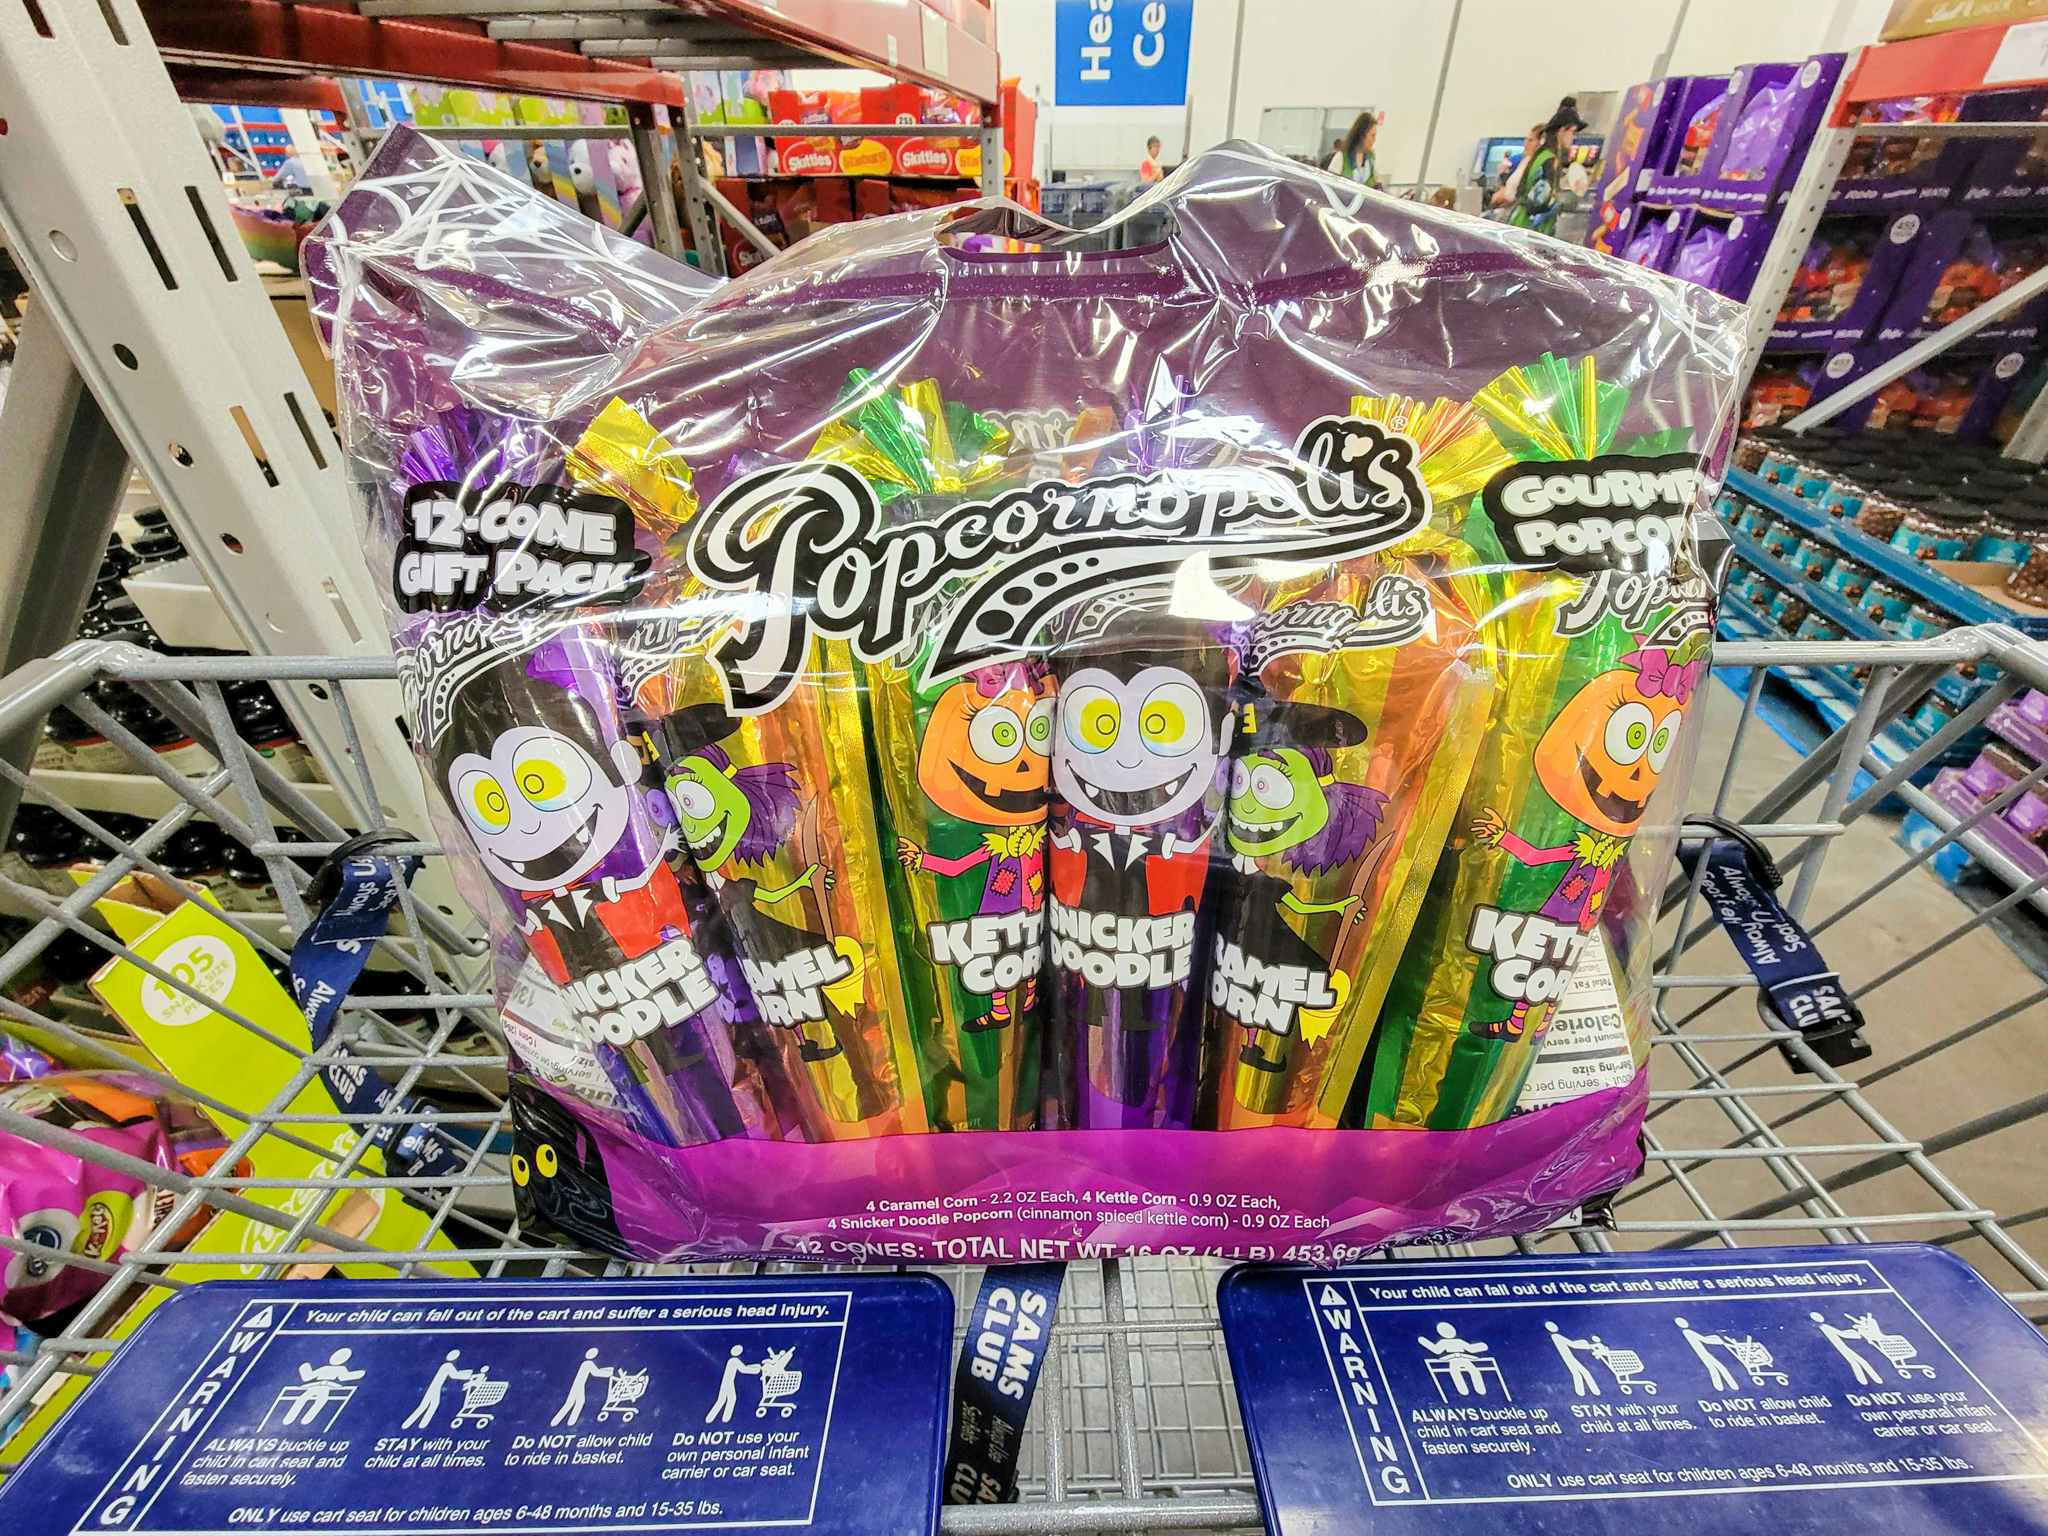 a bag of popcornopolis popcorn individually wrapped containers for halloween